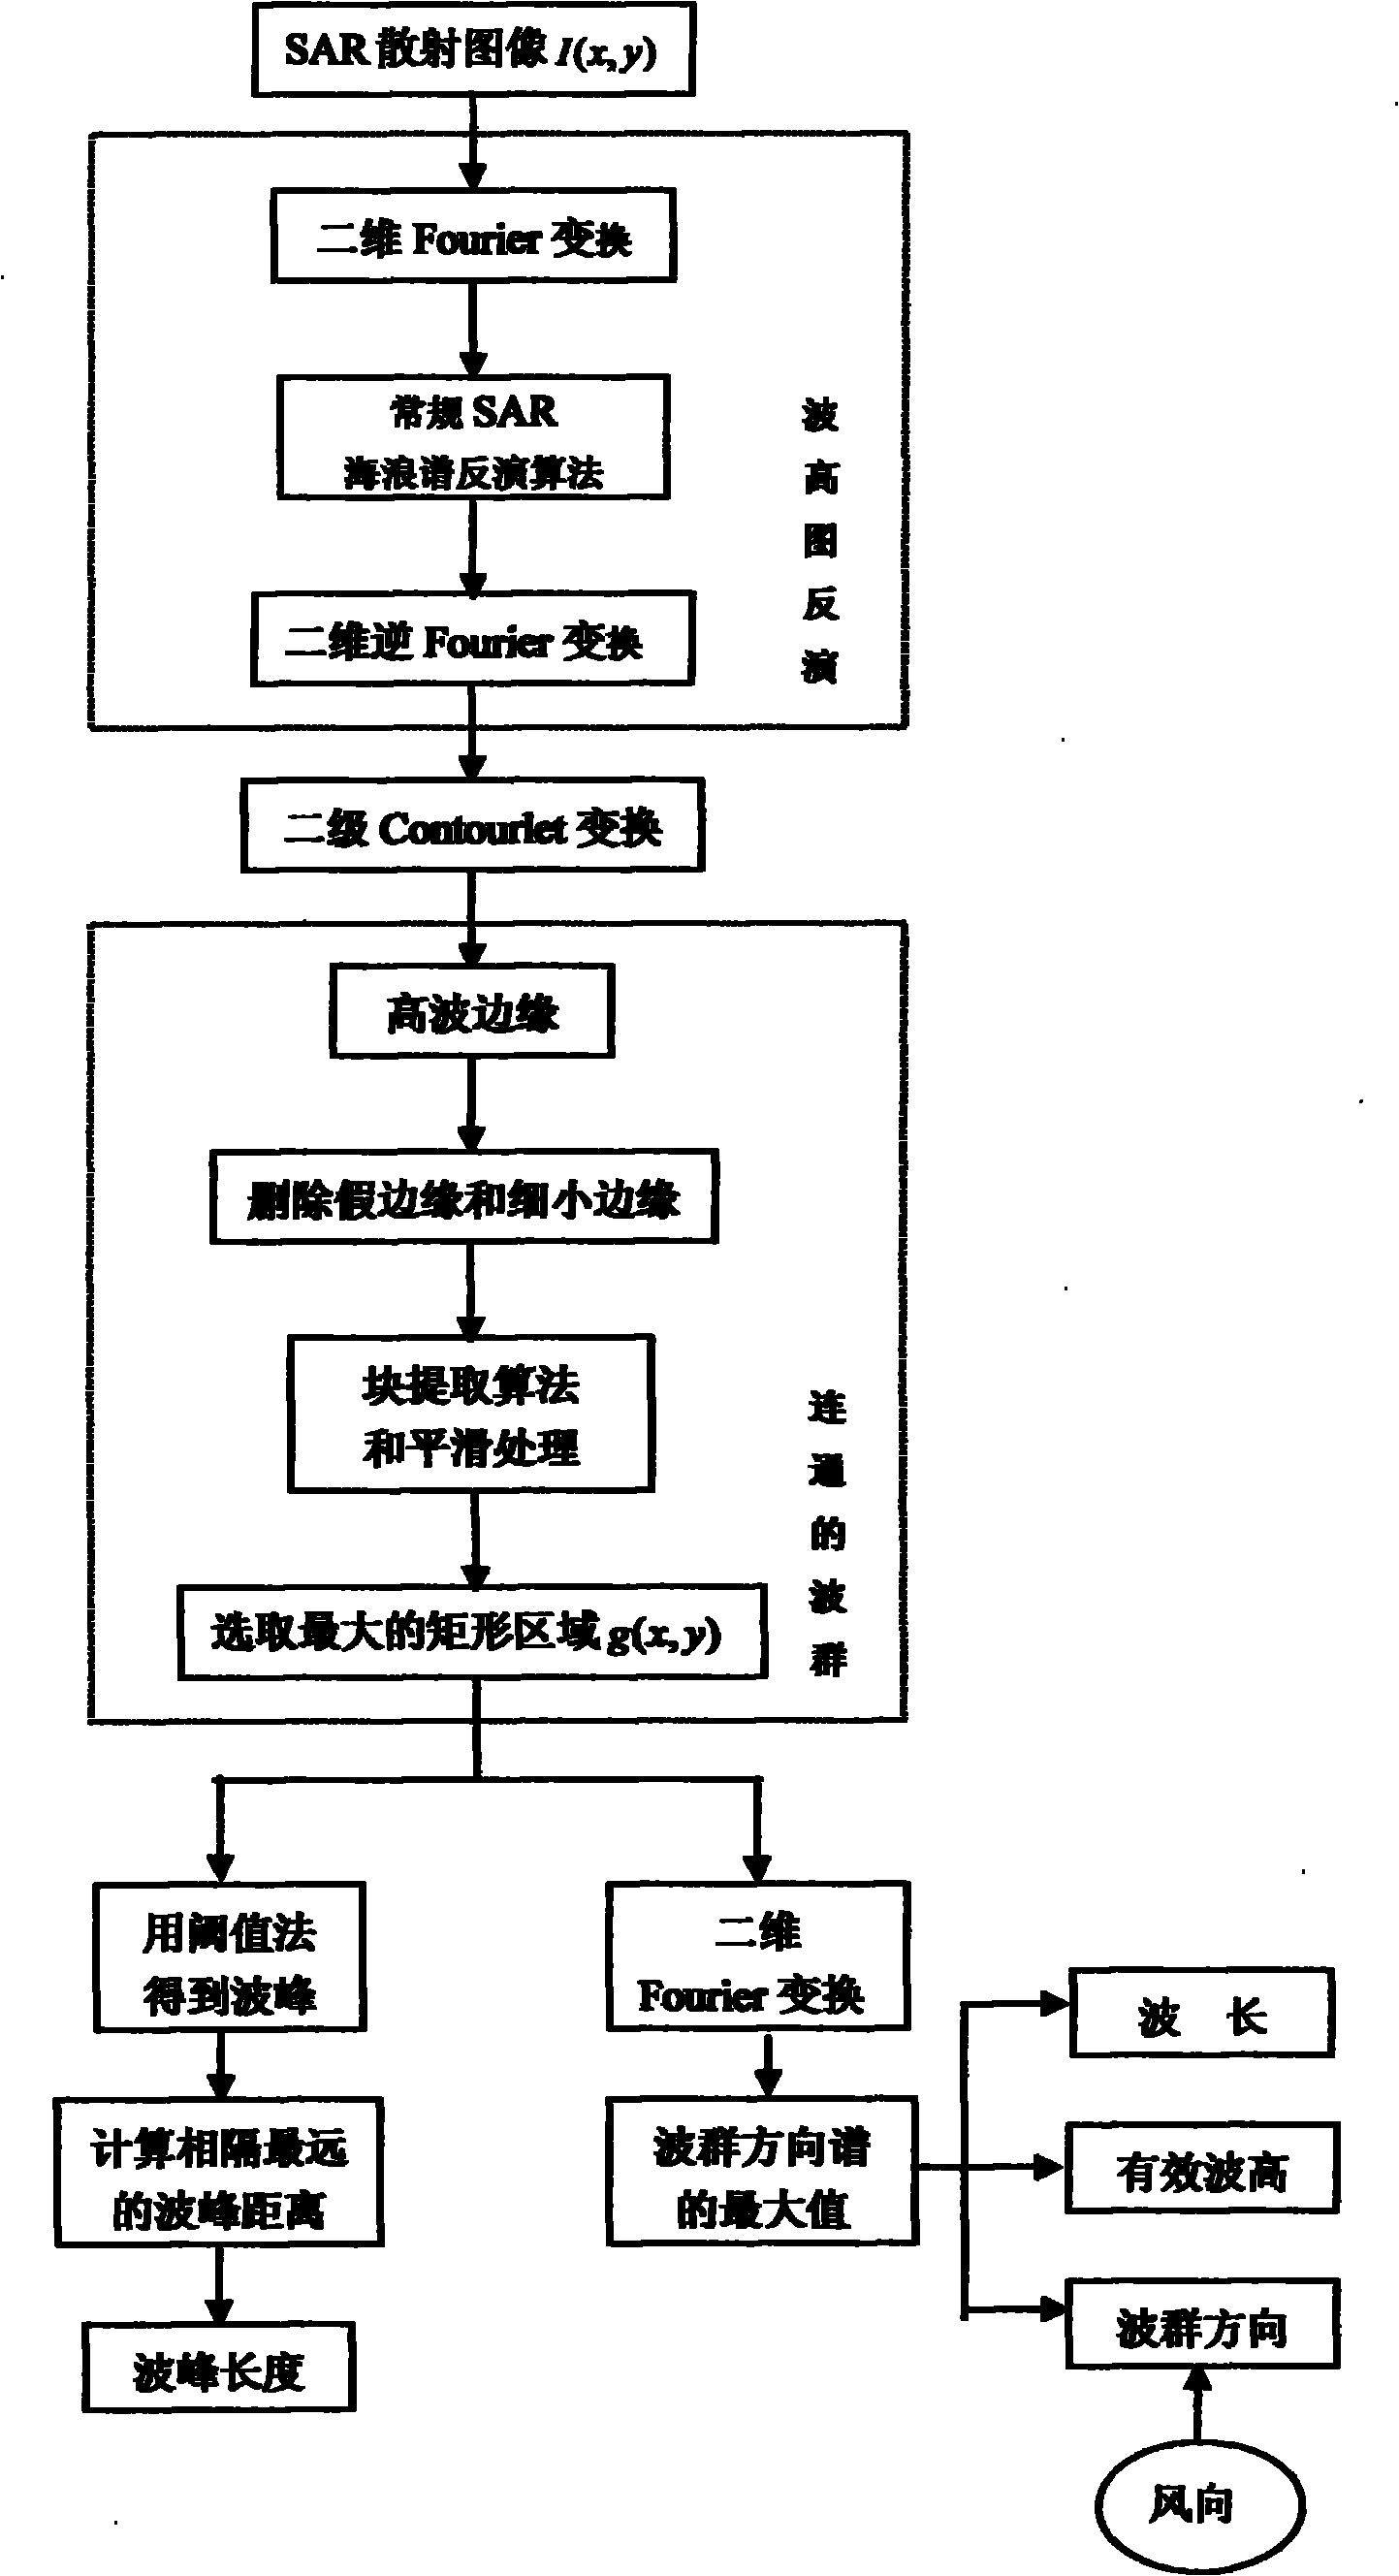 Method for detecting SAR (stop and reveres) image wave group parameters based on contourlet conversion